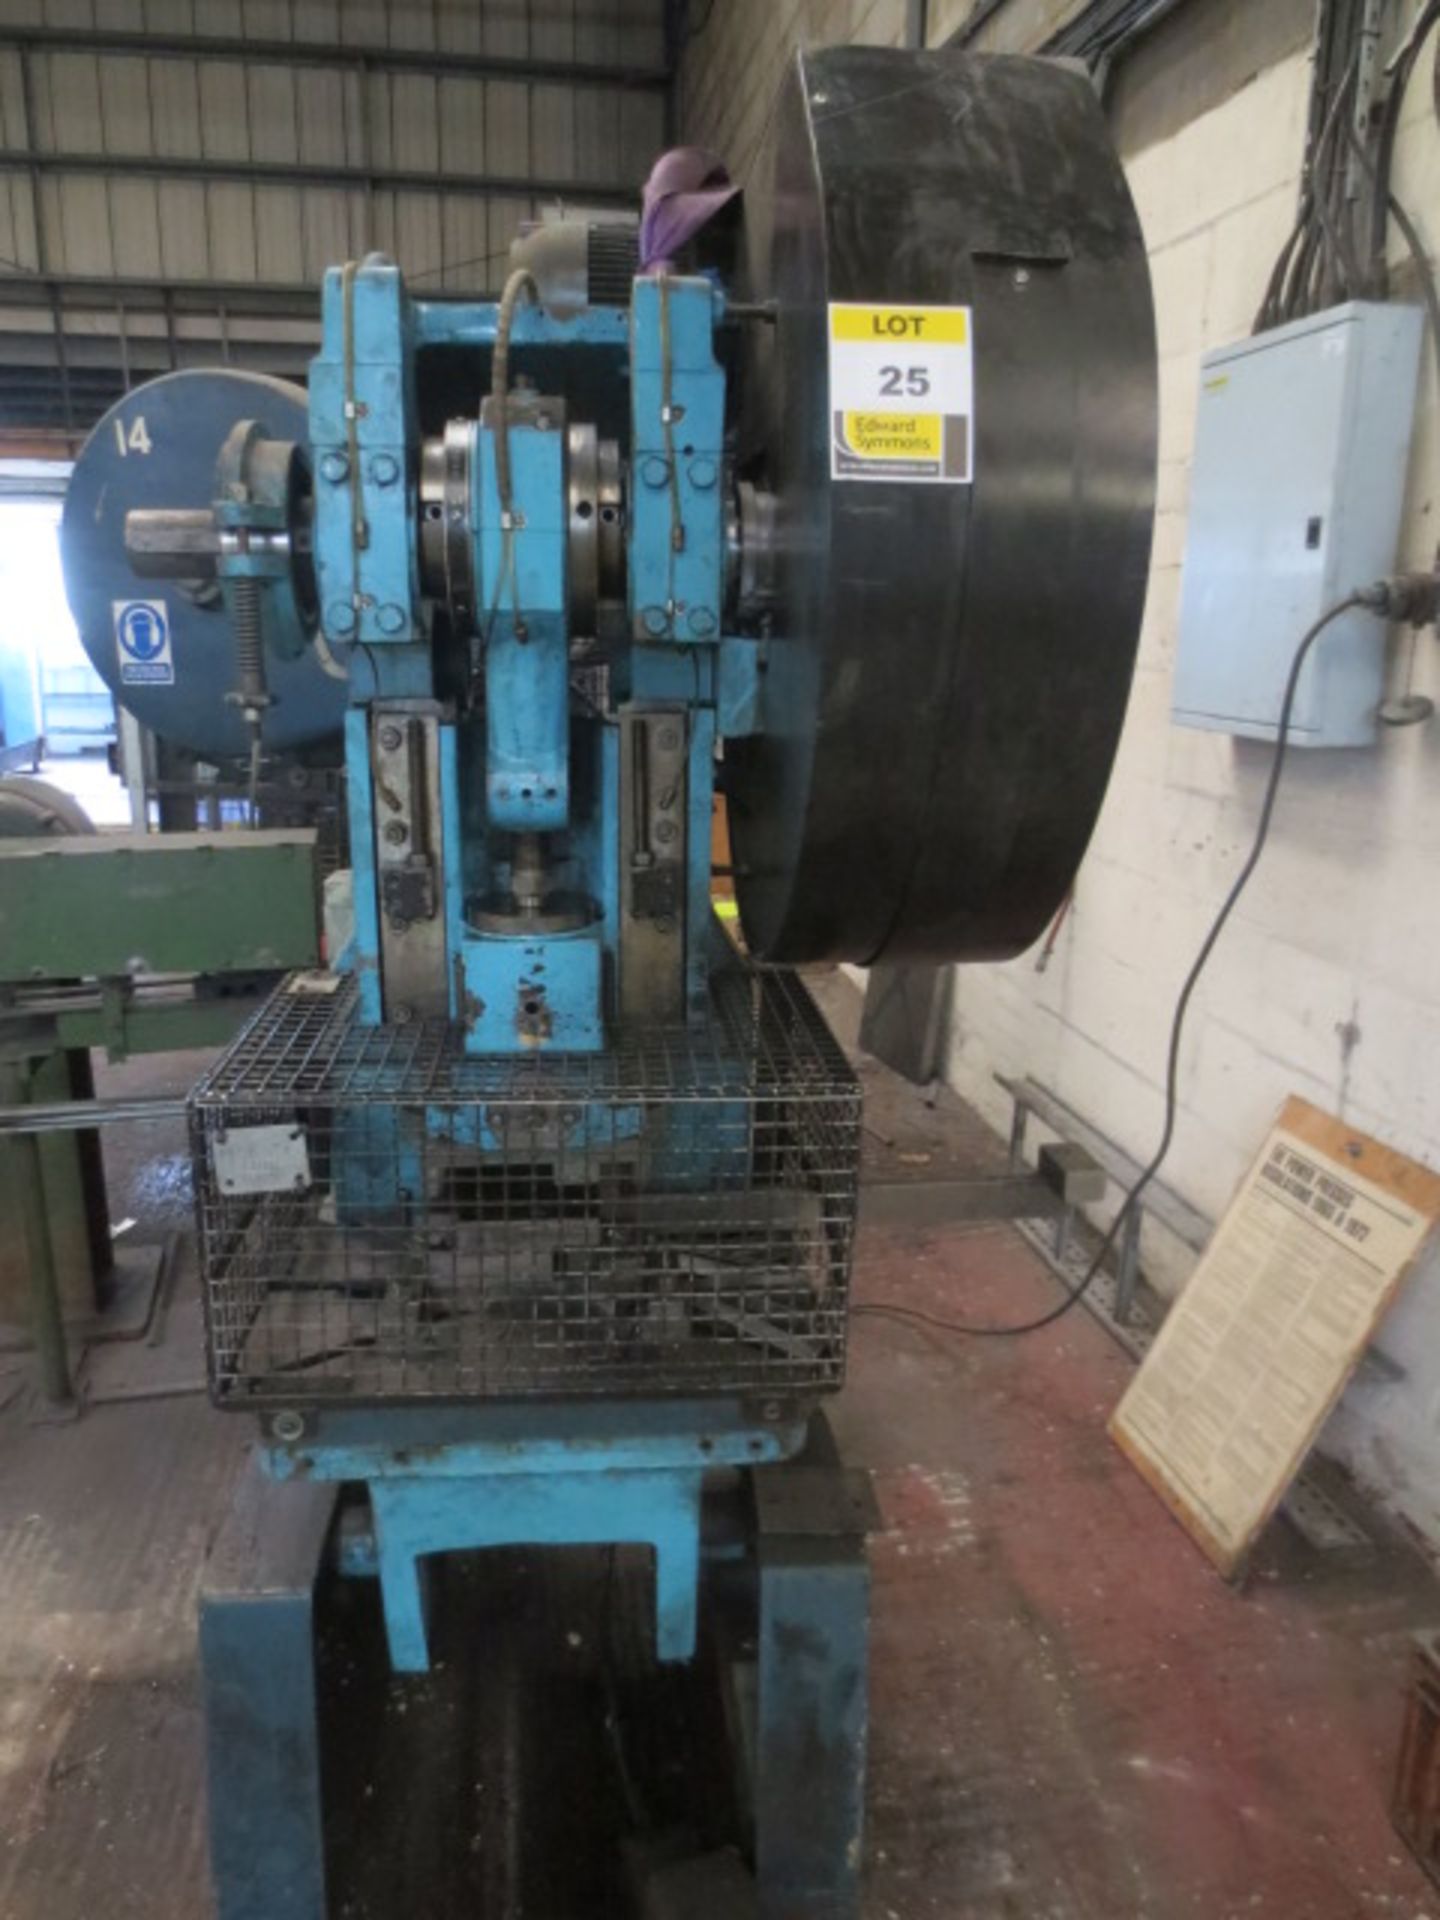 Jones & Altwood 30 ton STD.00, Serial No 30M502 inclinable power press  (A Work Method Statement and